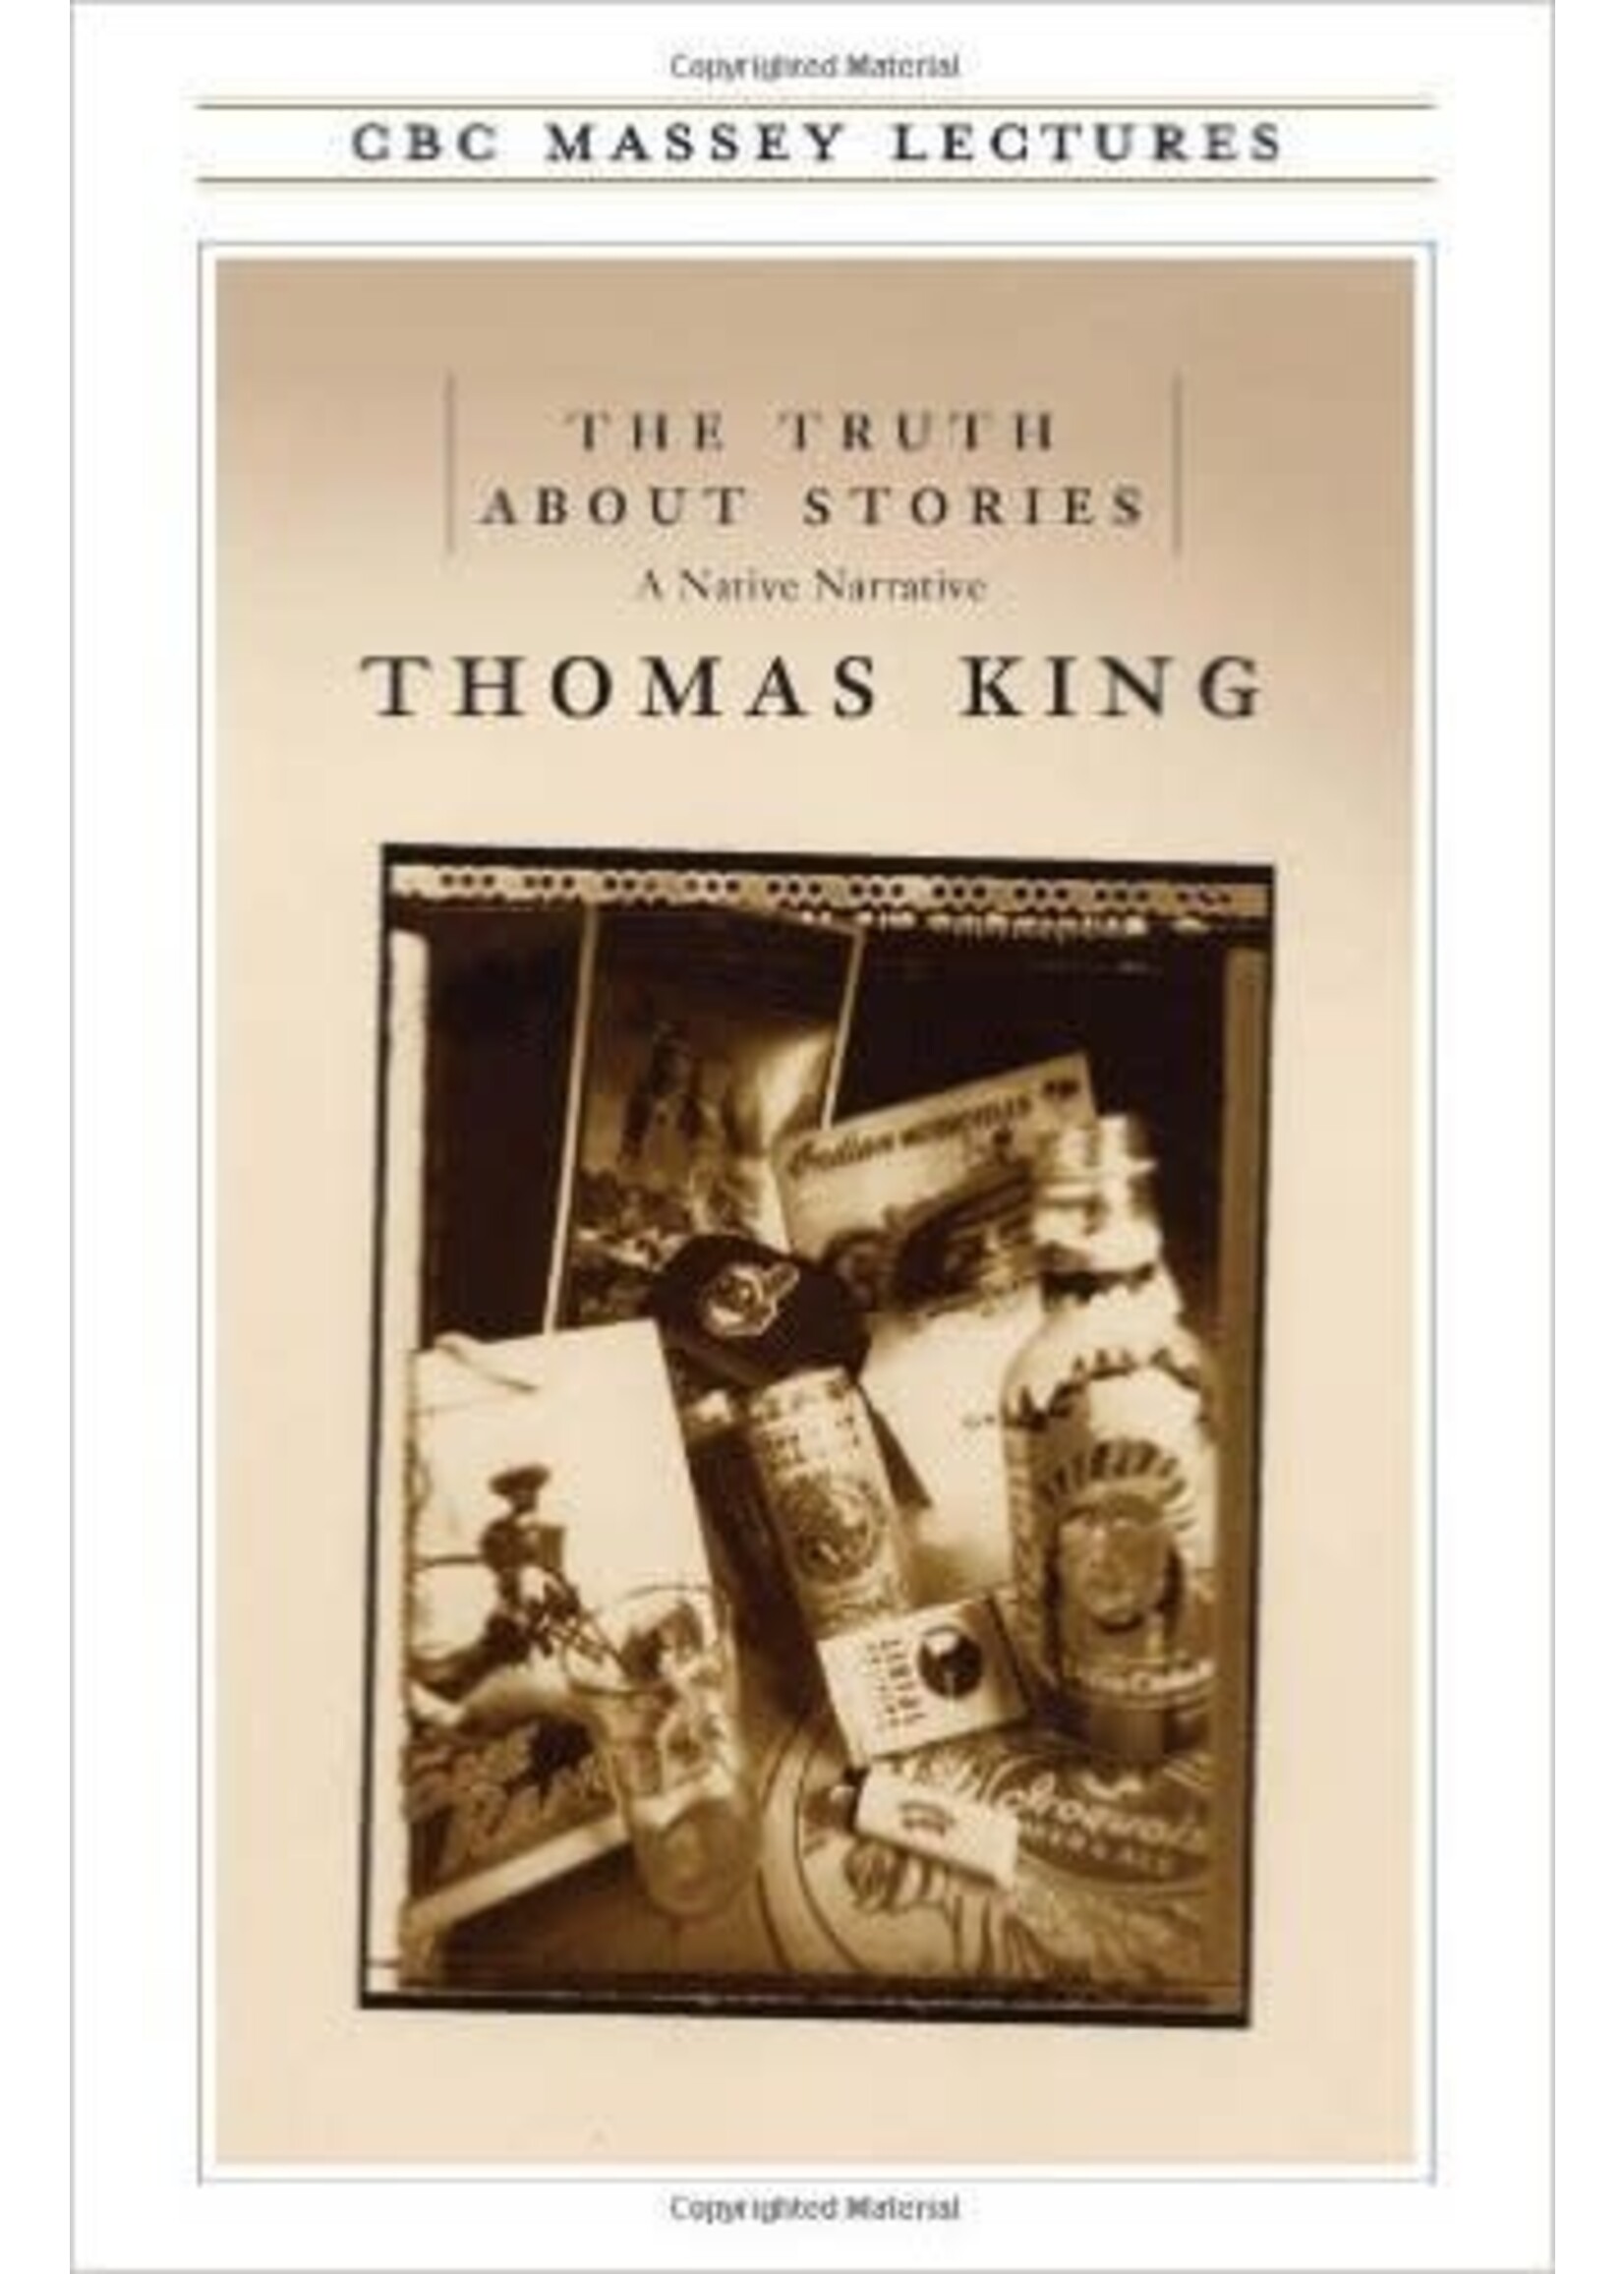 The Truth About Stories by Thomas King